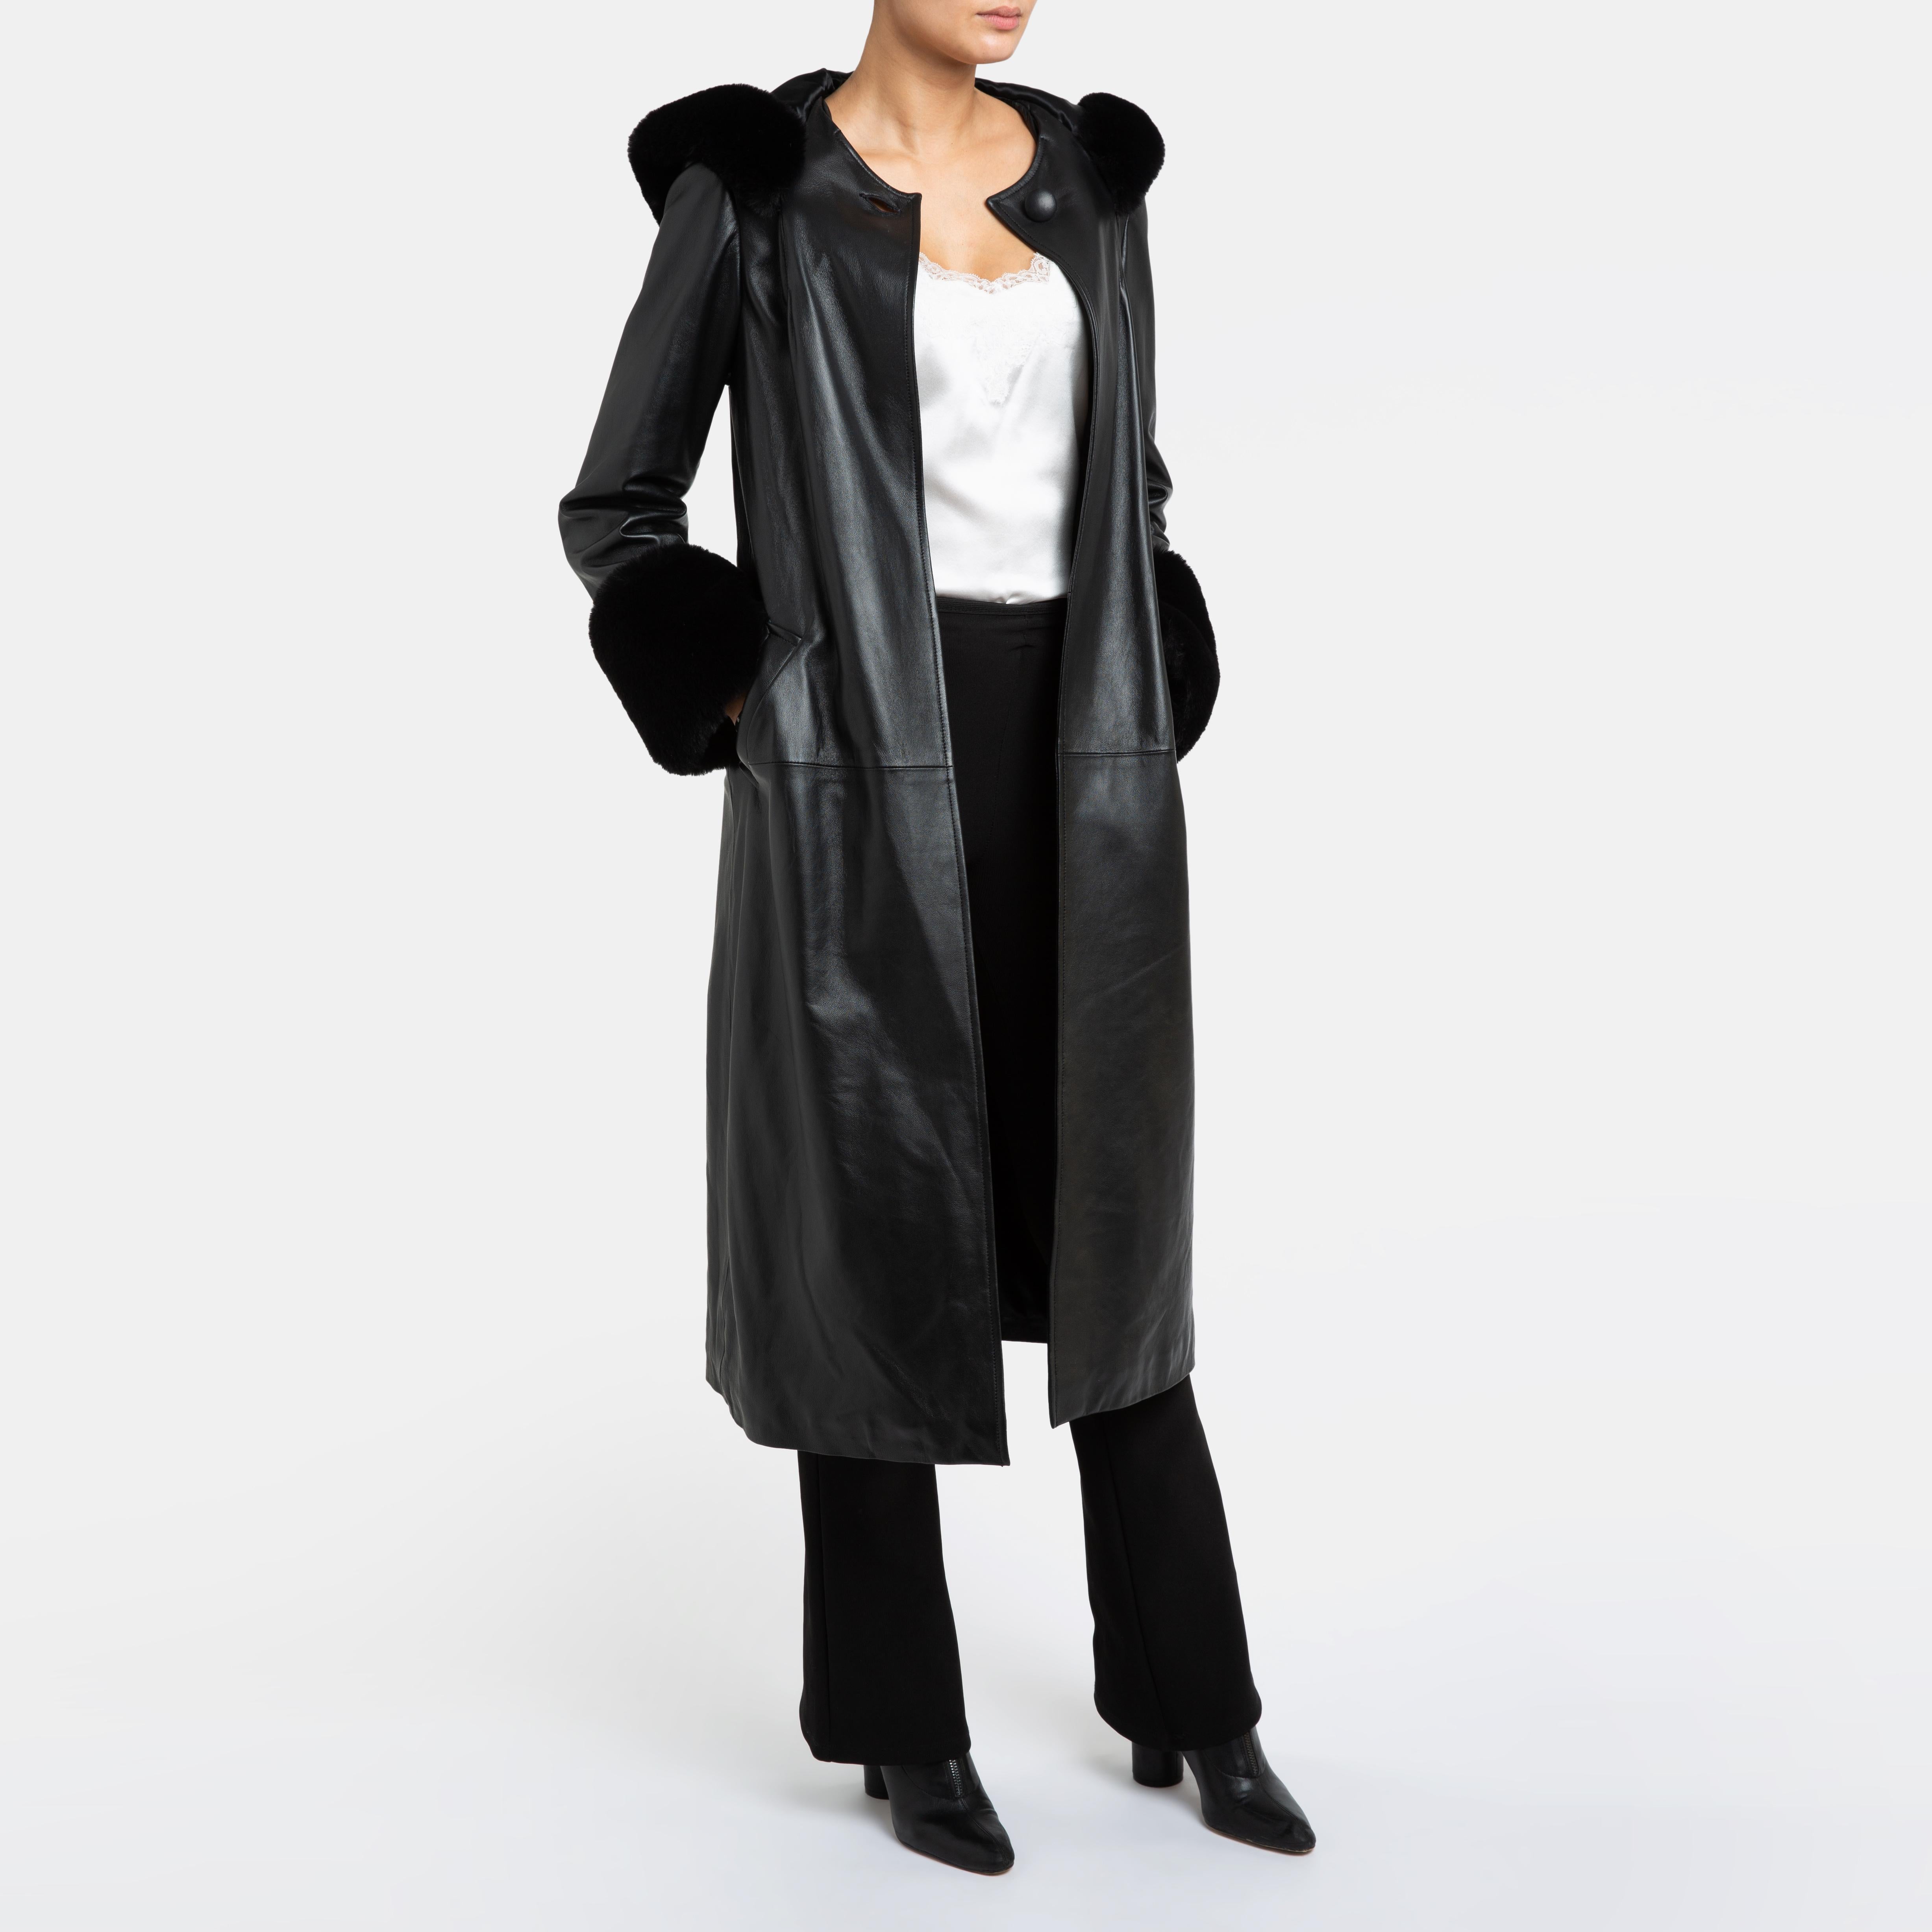 Verheyen London Hooded Leather Trench Coat in Black with Faux Fur - Size uk 10  For Sale 7